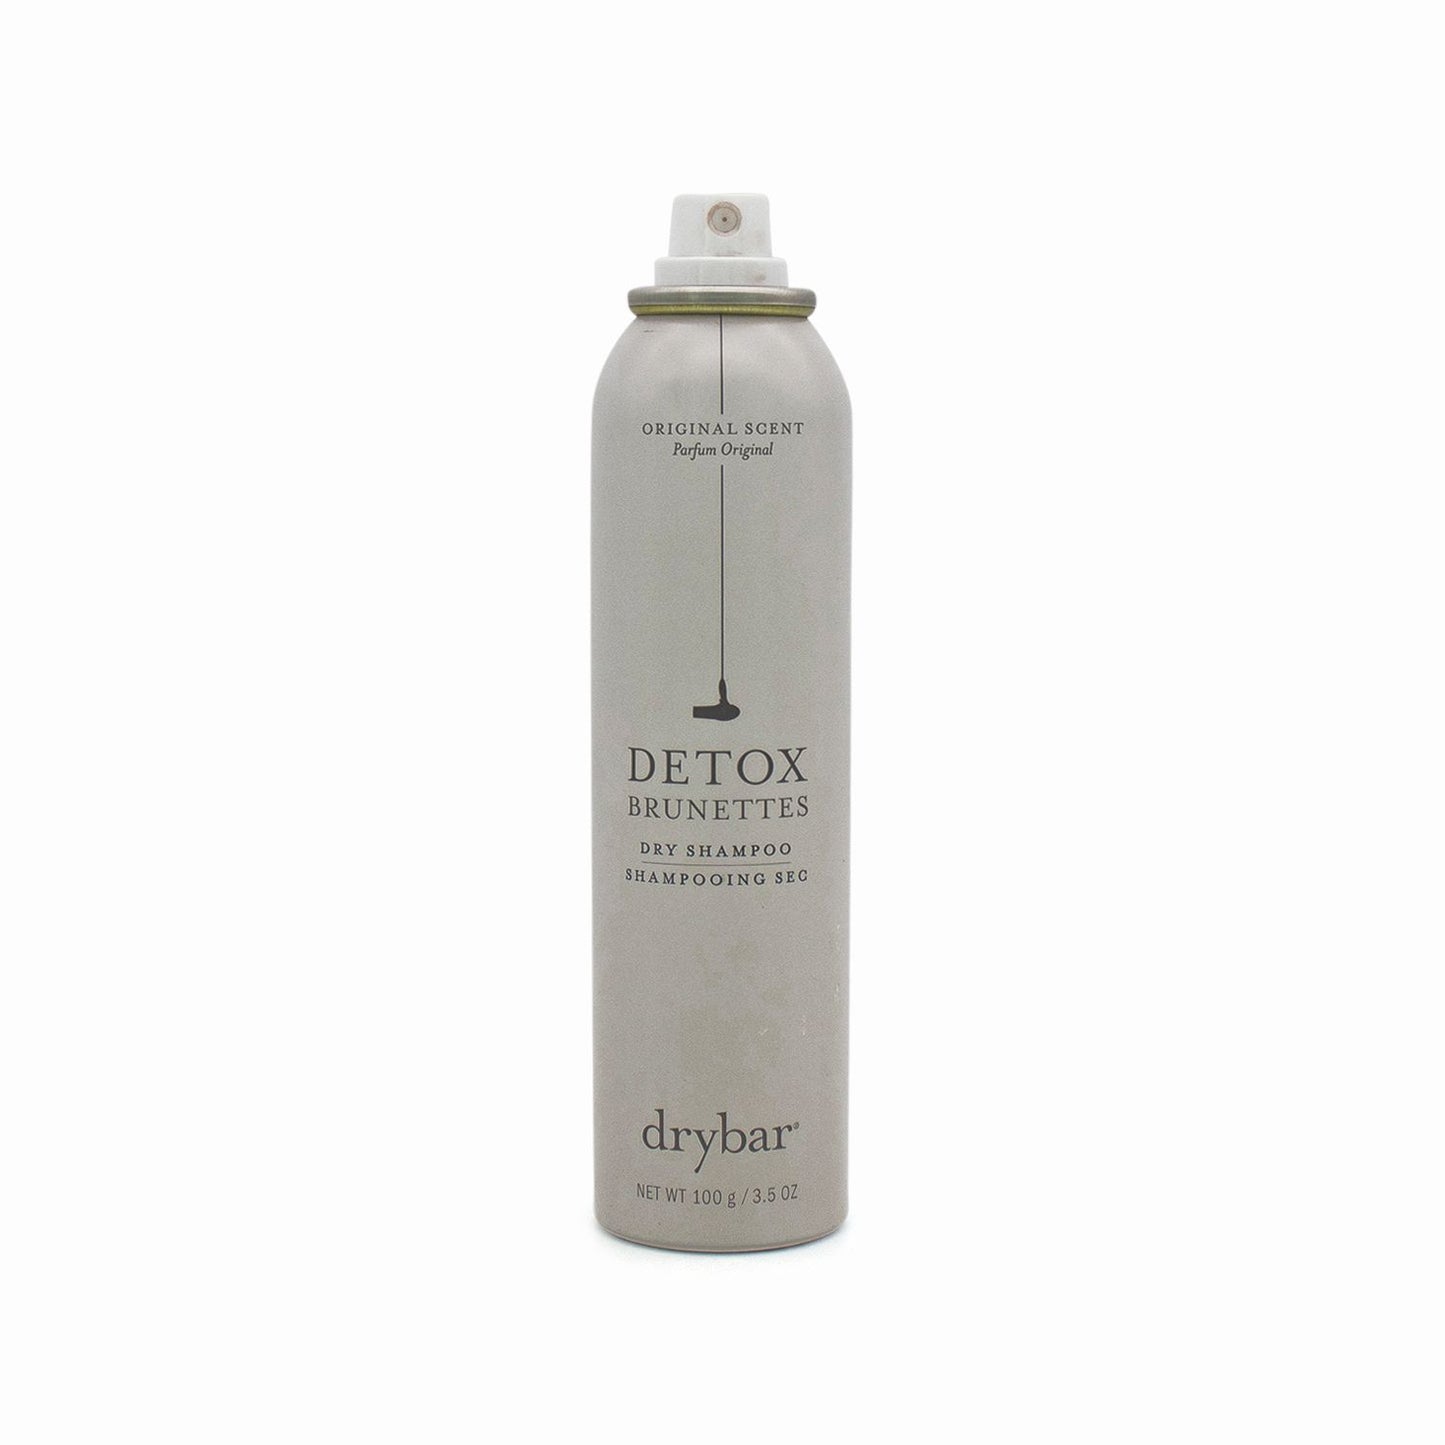 Drybar Detox Dry Shampoo Brunettes 100g - Imperfect Container & Missing Lid